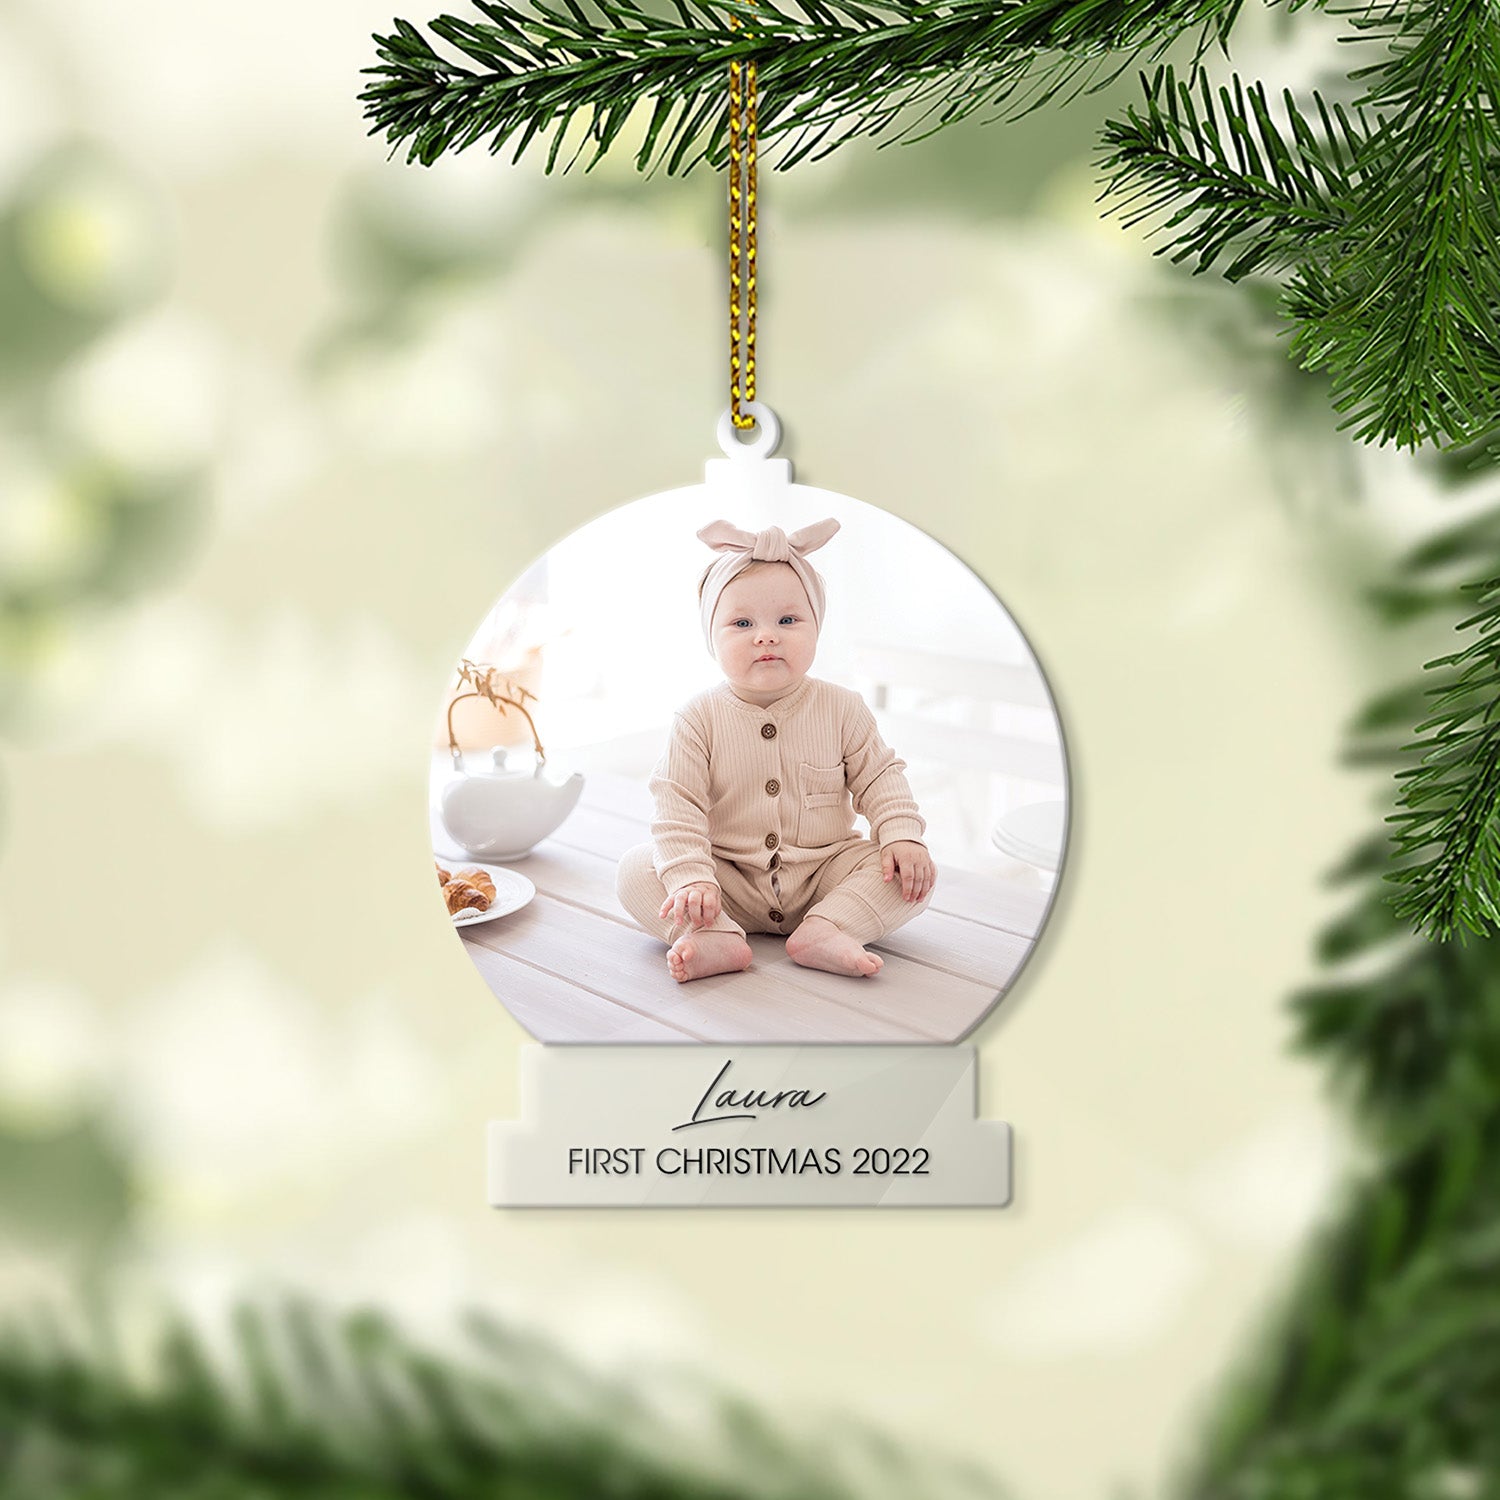 Personalized Name And Photo, Ornament For Baby, First Christmas 2022, Christmas Shape Ornament 2 Sides